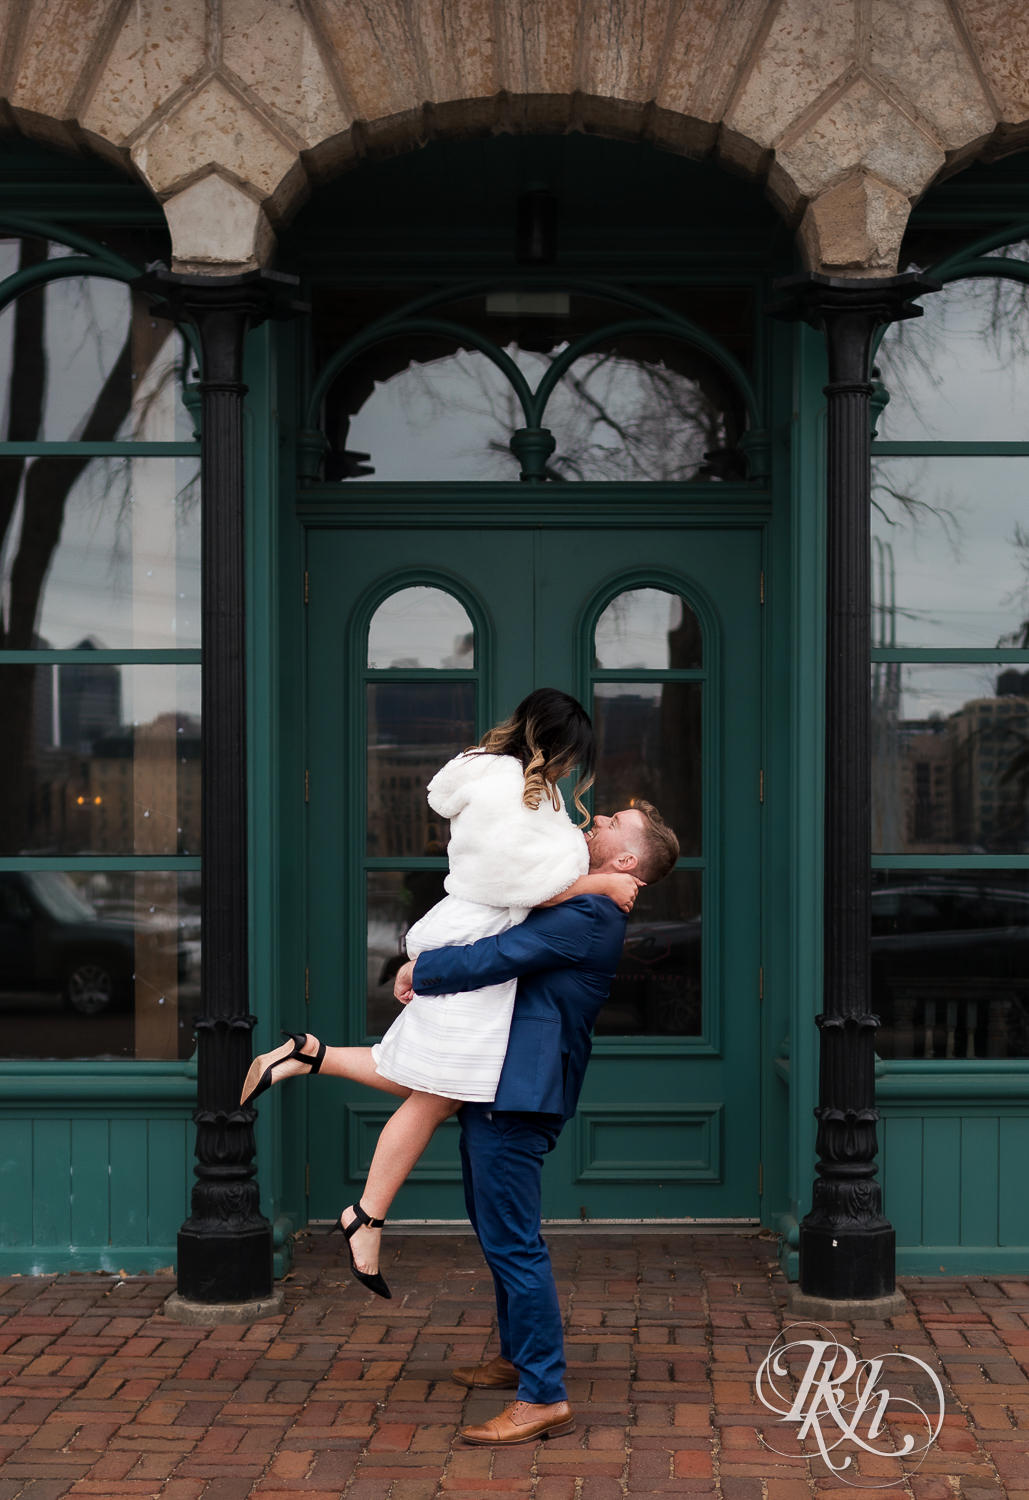 Man lifts Hmong woman in Saint Anthony Main in Minneapolis, Minnesota.